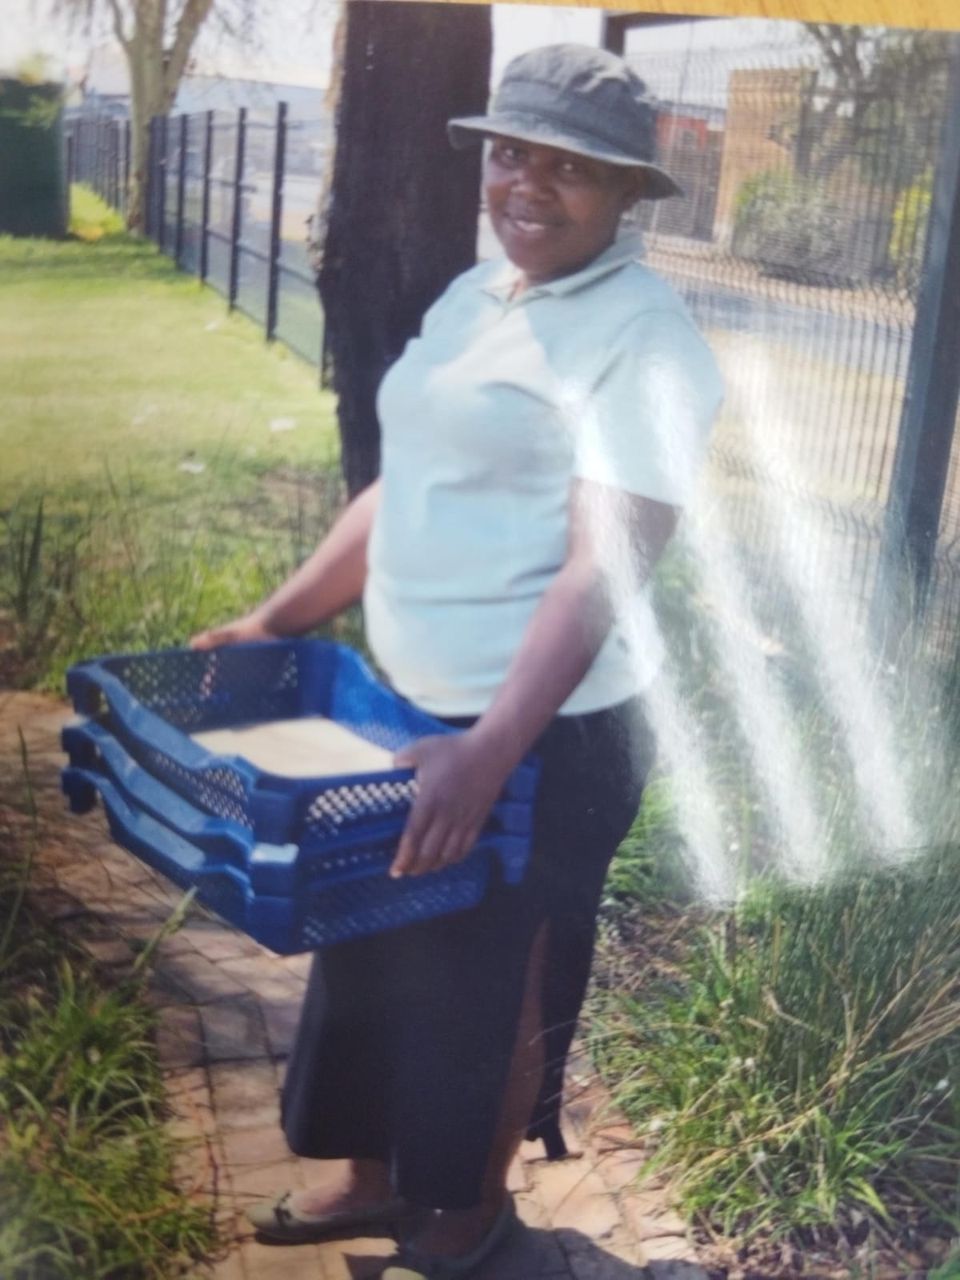 Kimberley police need assistance in tracing a missing person